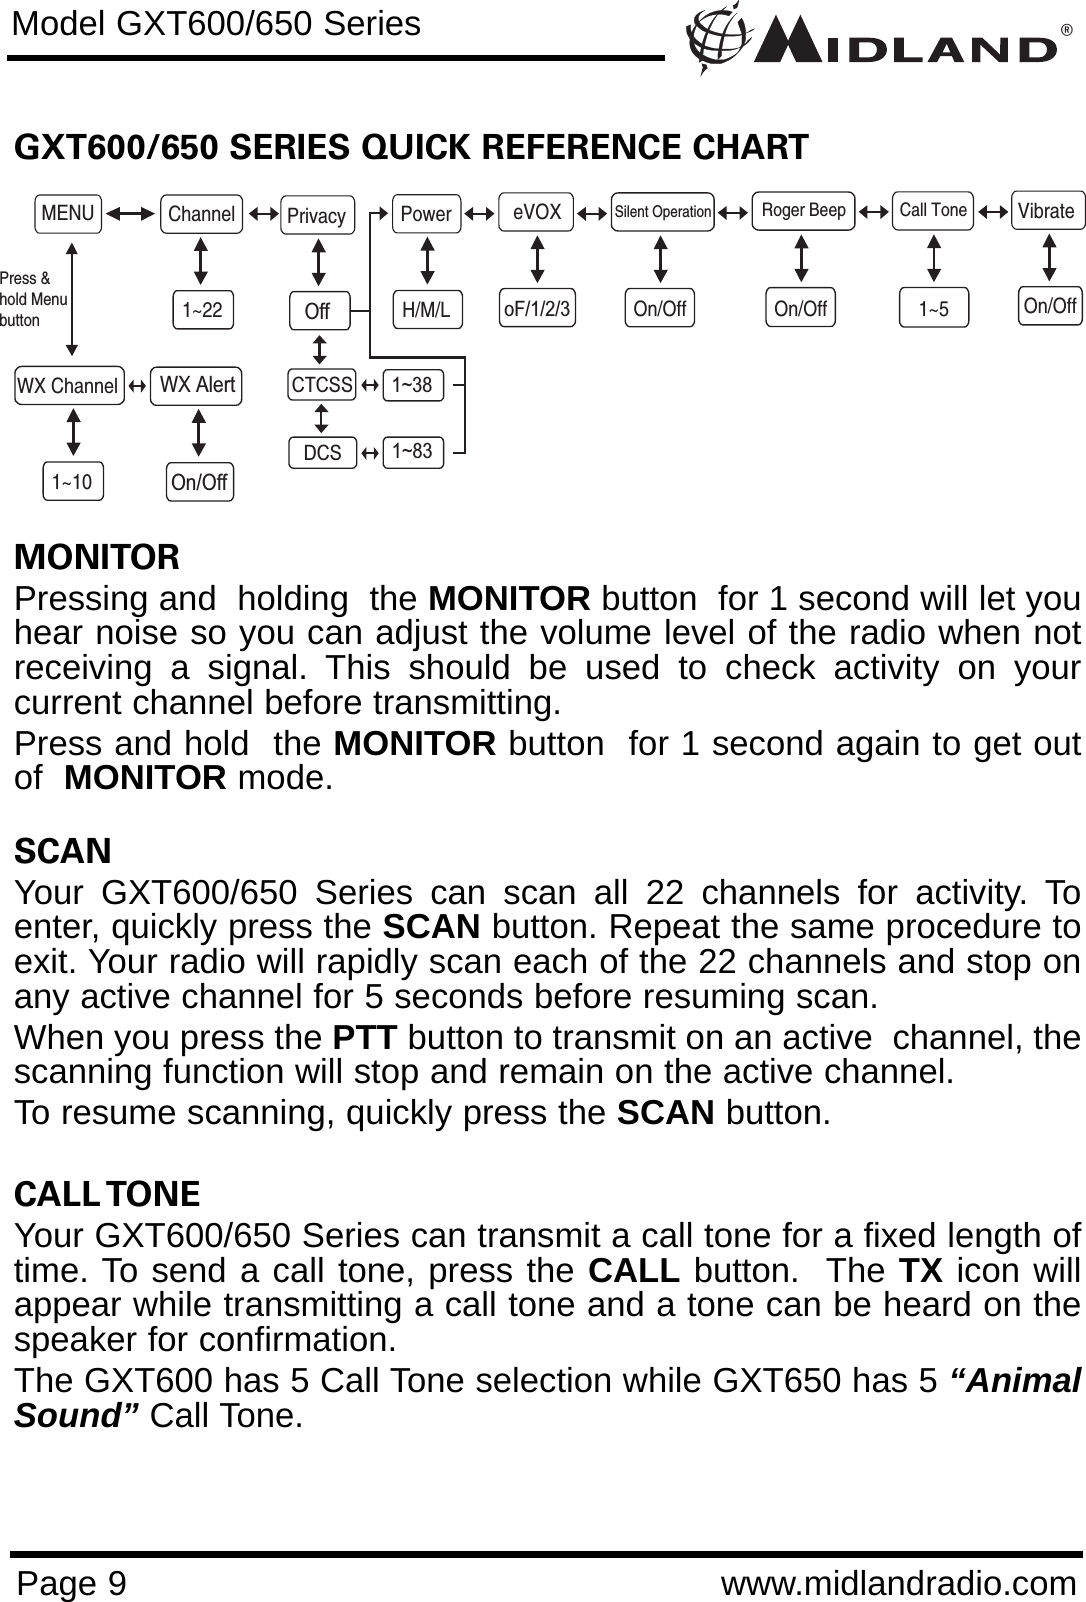 ®Page 9 www.midlandradio.comGXT600/650 SERIES QUICK REFERENCE CHARTMONITOR Pressing and  holding  the MONITOR button  for 1 second will let youhear noise so you can adjust the volume level of the radio when notreceiving a signal. This should be used to check activity on yourcurrent channel before transmitting. Press and hold  the MONITOR button  for 1 second again to get outof  MONITOR mode.SCAN Your GXT600/650 Series can scan all 22 channels for activity. Toenter, quickly press the SCAN button. Repeat the same procedure toexit. Your radio will rapidly scan each of the 22 channels and stop onany active channel for 5 seconds before resuming scan.When you press the PTT button to transmit on an active  channel, thescanning function will stop and remain on the active channel. To resume scanning, quickly press the SCAN button.CALL TONE Your GXT600/650 Series can transmit a call tone for a fixed length oftime. To send a call tone, press the CALL button.  The TX icon willappear while transmitting a call tone and a tone can be heard on thespeaker for confirmation. The GXT600 has 5 Call Tone selection while GXT650 has 5 “AnimalSound” Call Tone.Model GXT600/650 SeriesMENU Channel eVOX1~22Privacy Roger BeepOn/OffPowerH/M/LCall Tone1~5VibrateOn/OffWX Channel1~10Press &amp;hold MenubuttonSilent OperationOn/OffoF/1/2/3OffCTCSSDCS1~381~83WX AlertOn/Off